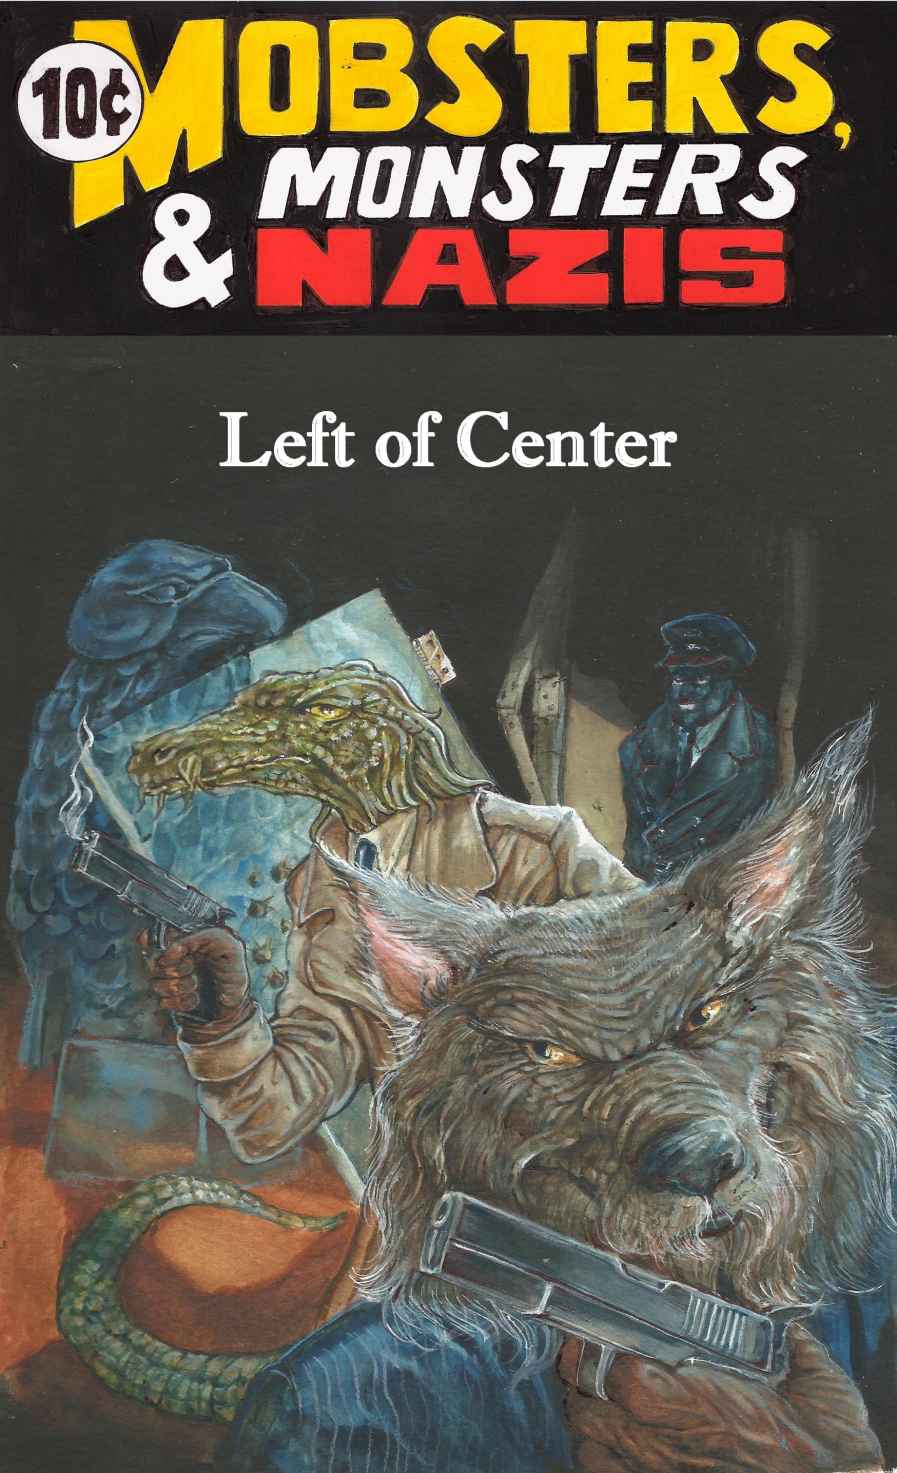 Left of Center (Mobsters, Monsters & Nazis Book 4)